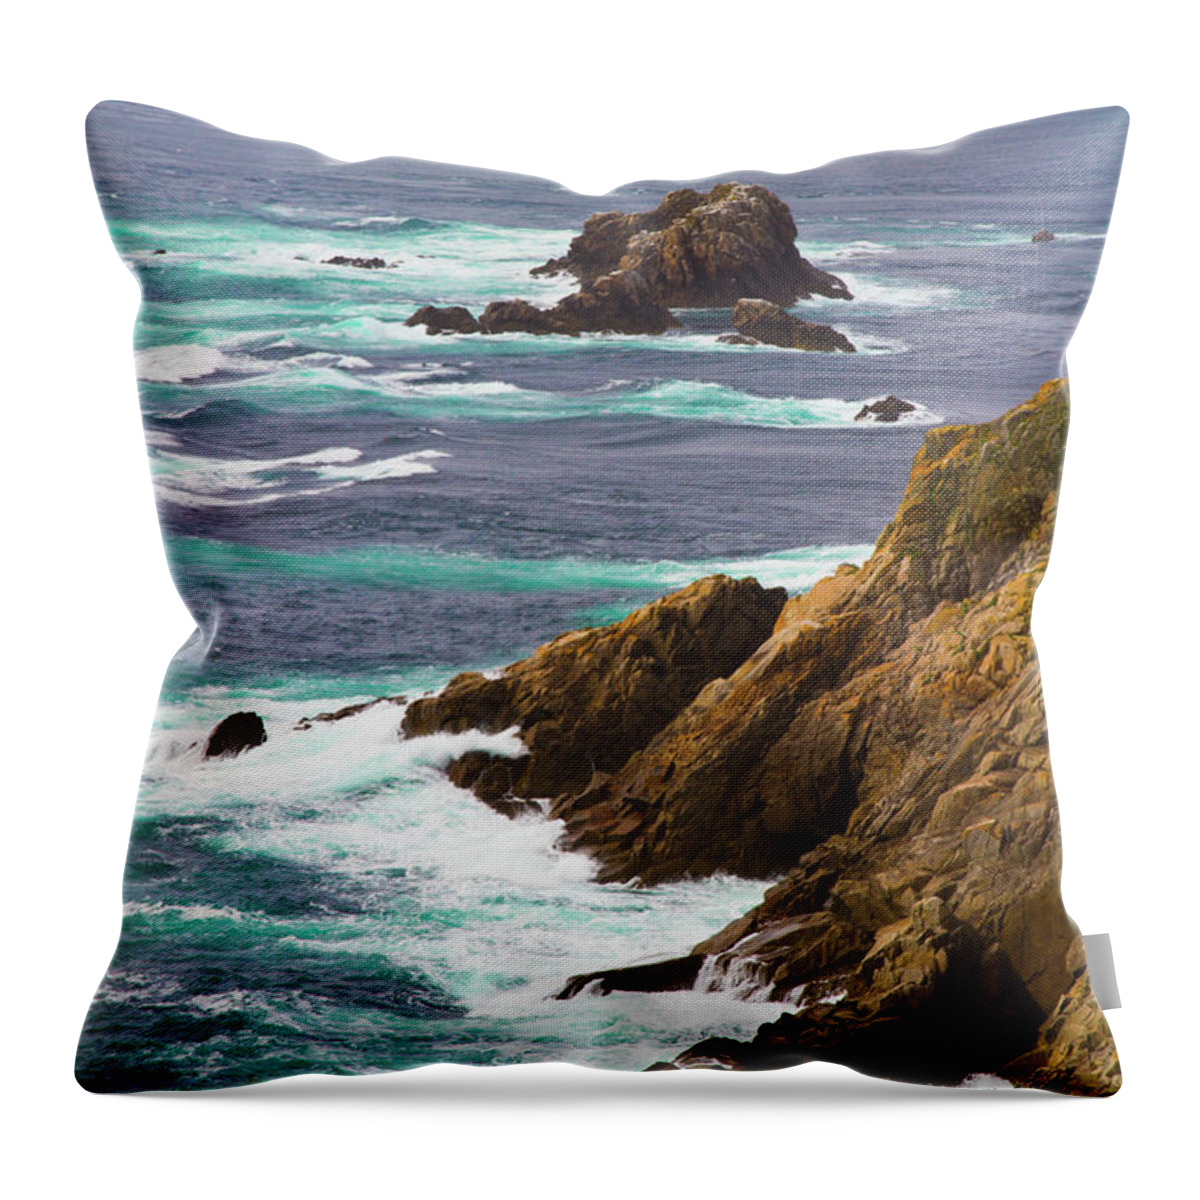 Tranquility Throw Pillow featuring the photograph France, Brittany, Pointe Du Raz #1 by Aldo Pavan